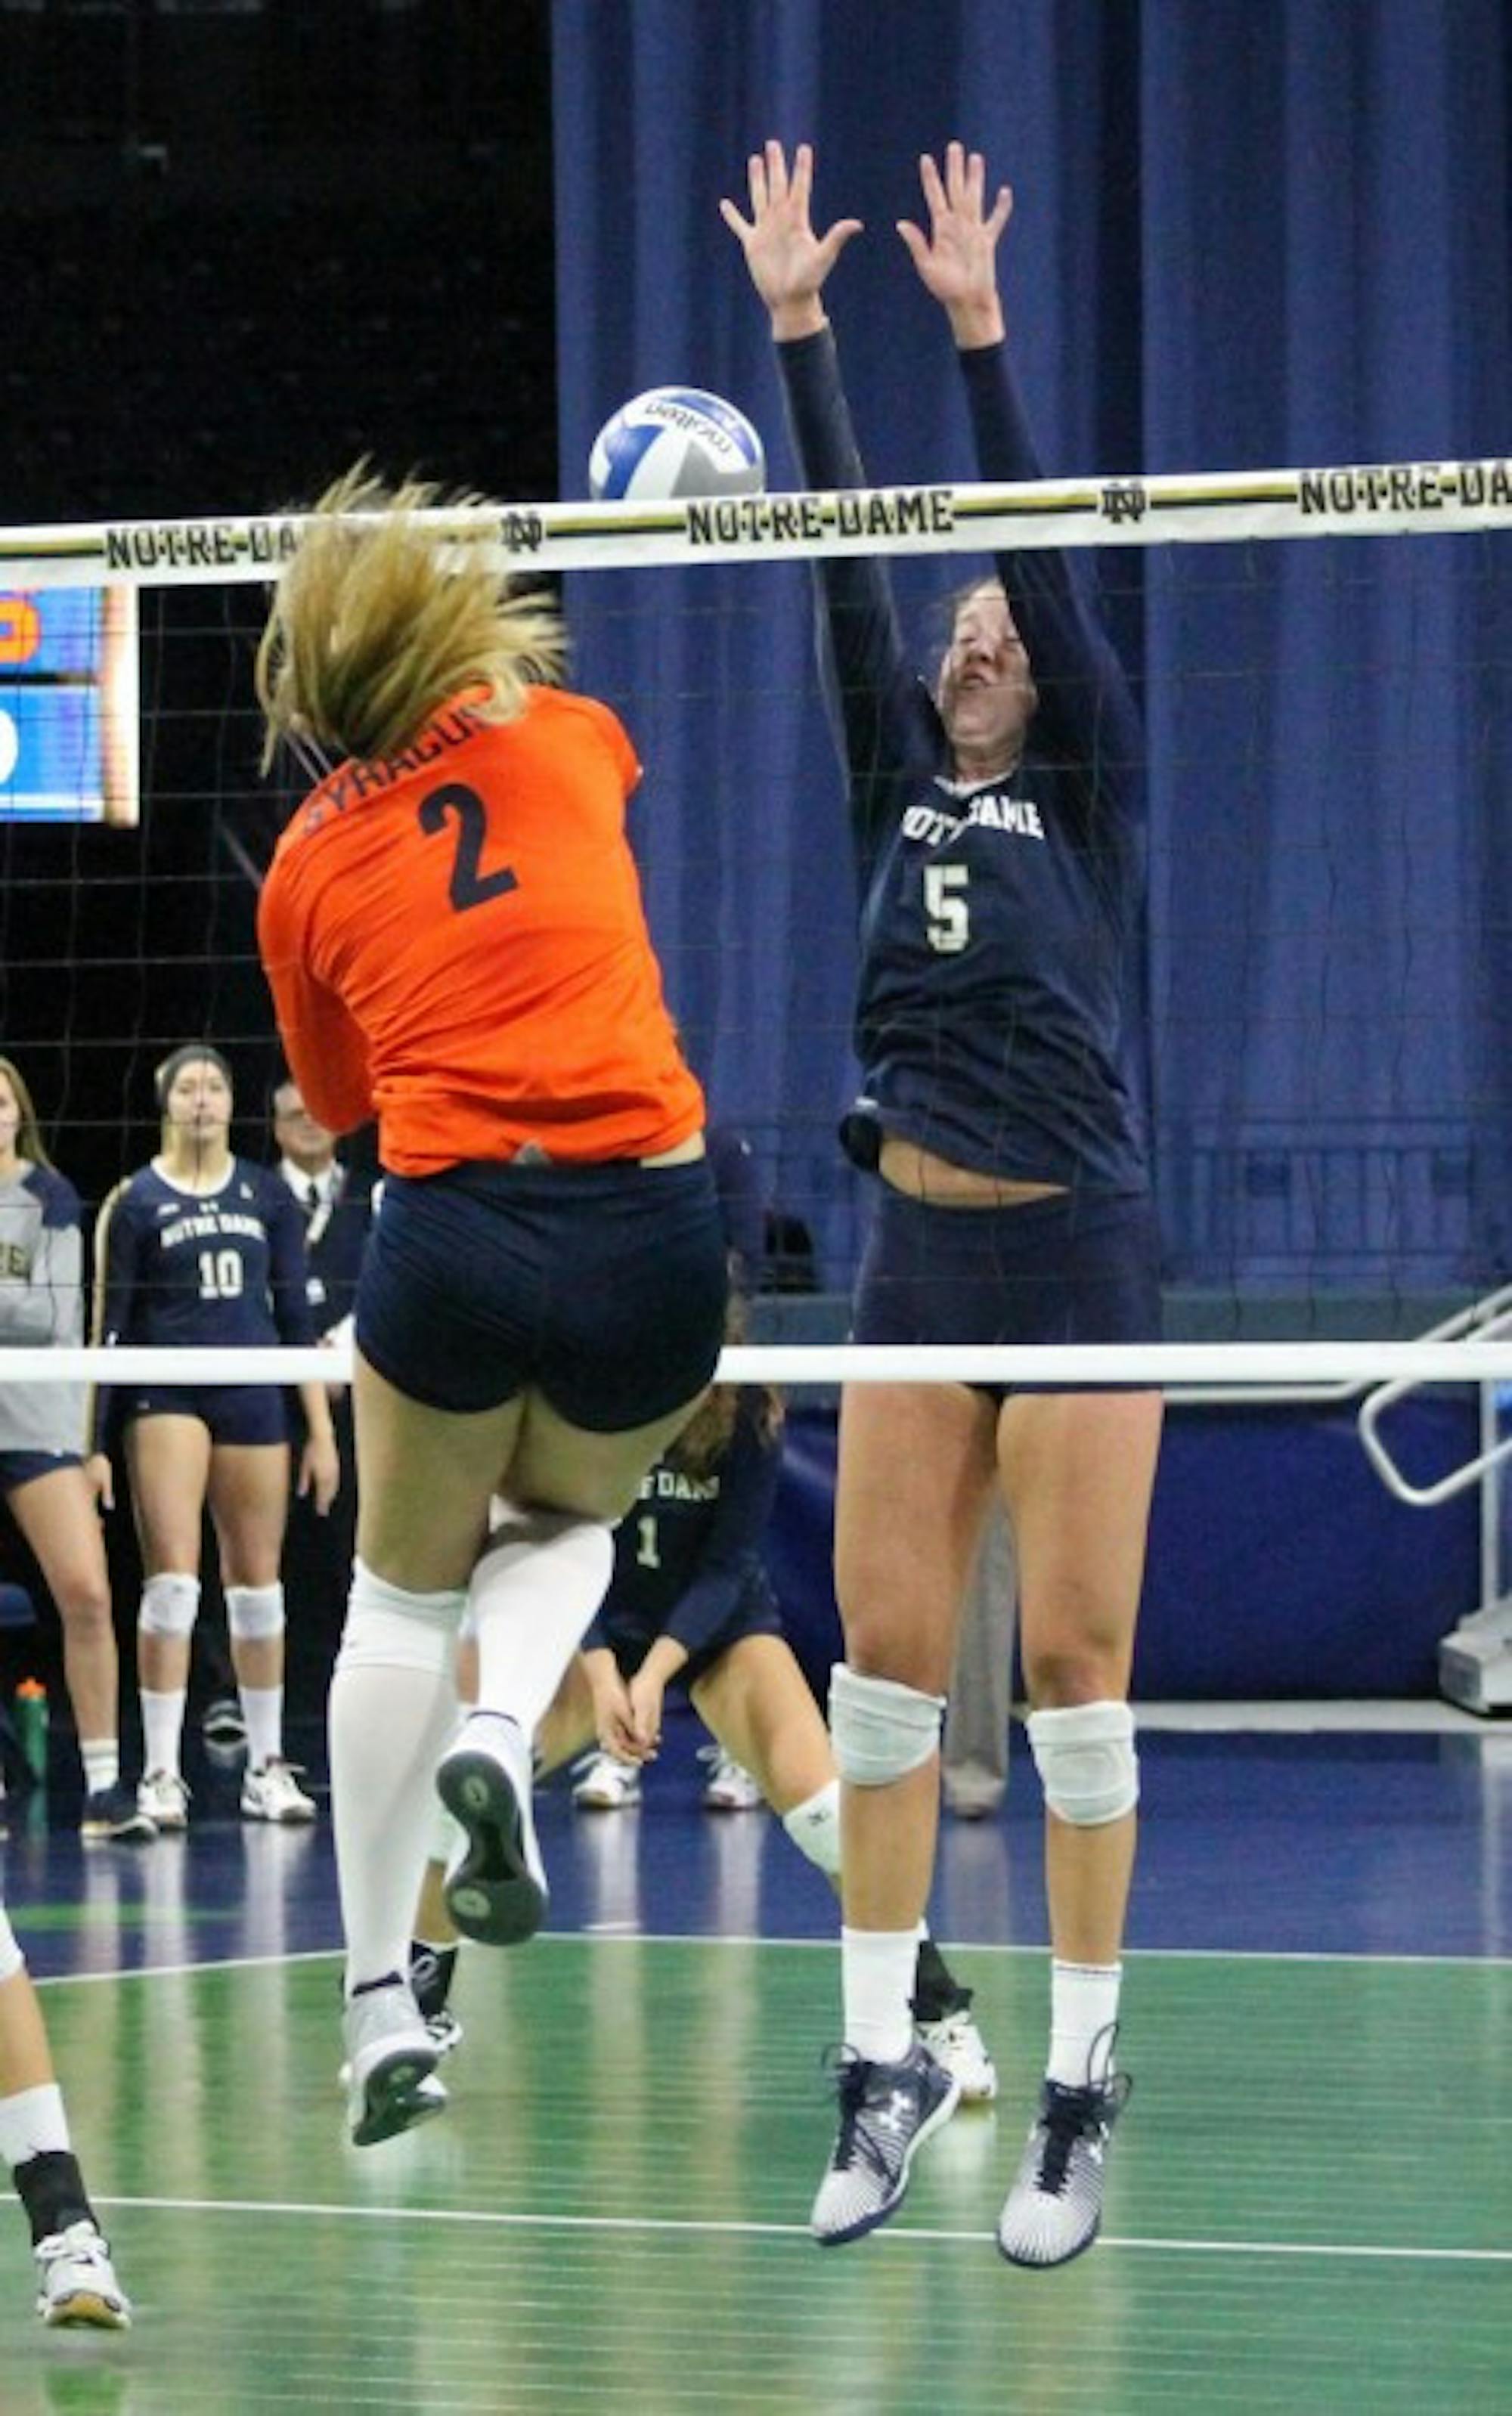 Sophomore outside hitter Sydney Kuhn jumps to block a hit during Notre Dame’s 3-2 loss to Syracuse on Sunday at Purcell Pavilion.